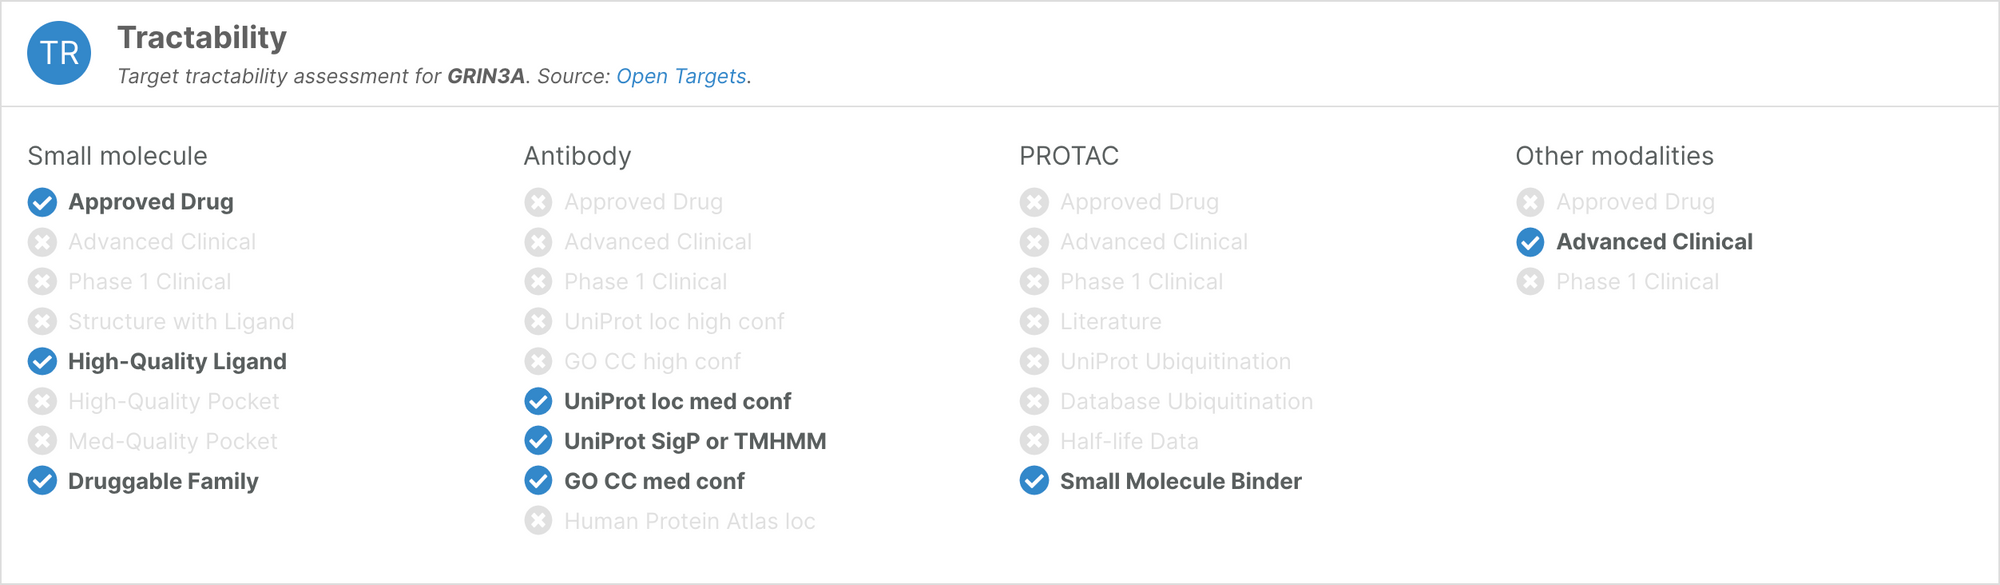 Widget featuring the title "Tractability", and the columns "Small molecule", "Antibody", "PROTAC", and "Other modalities"